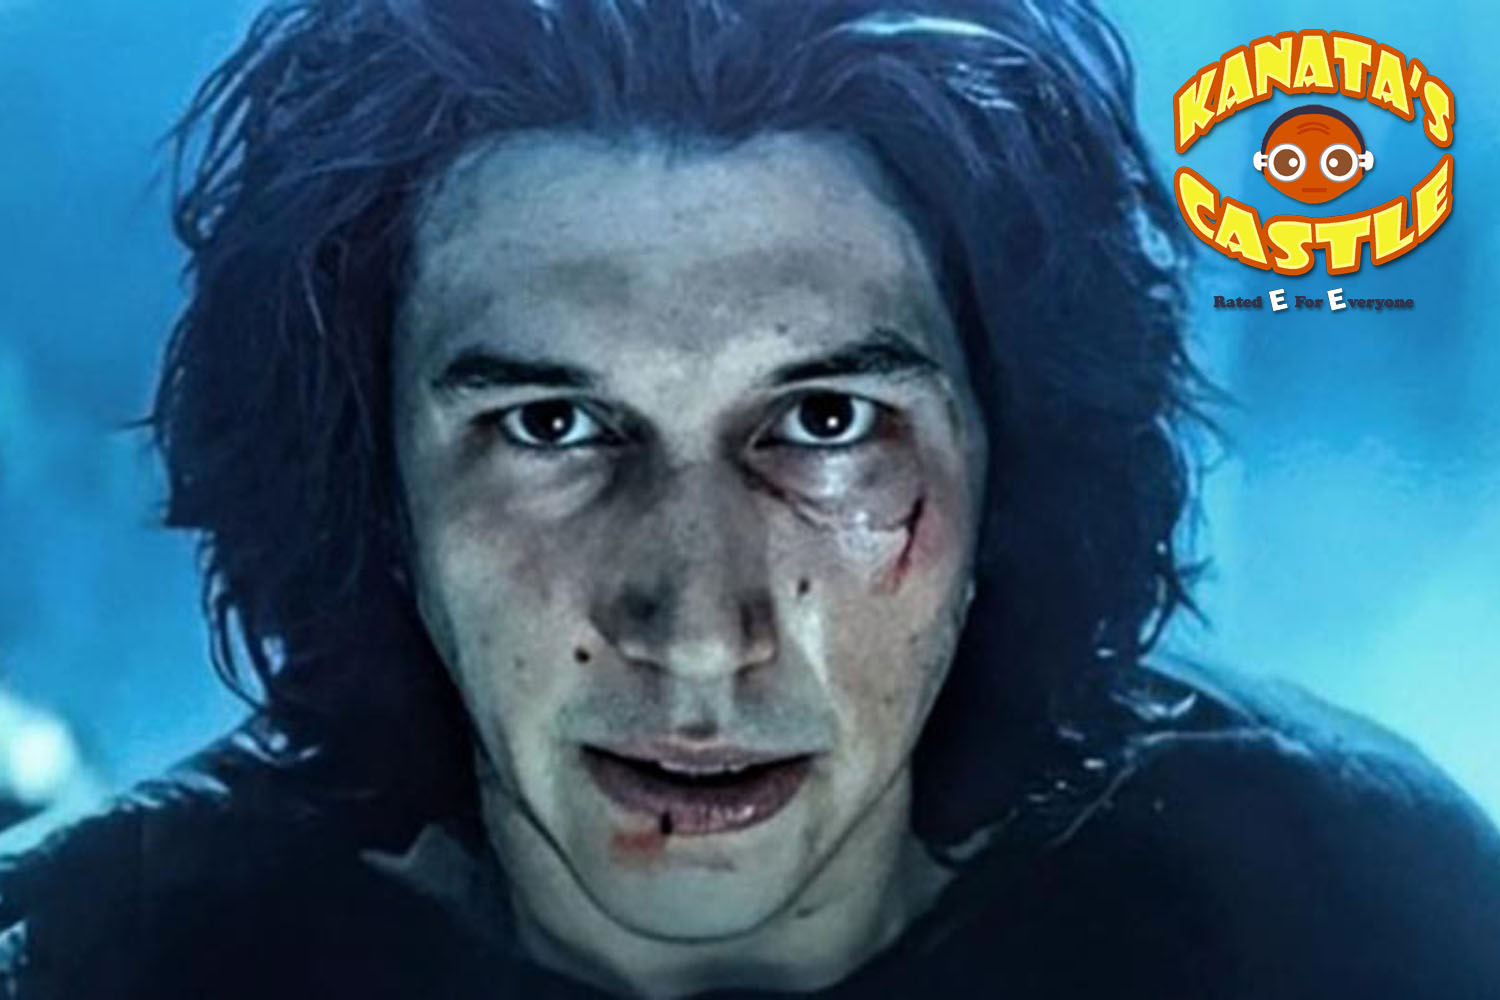 Kanata's Caslte #82: The Tortured Soul of Ben Solo